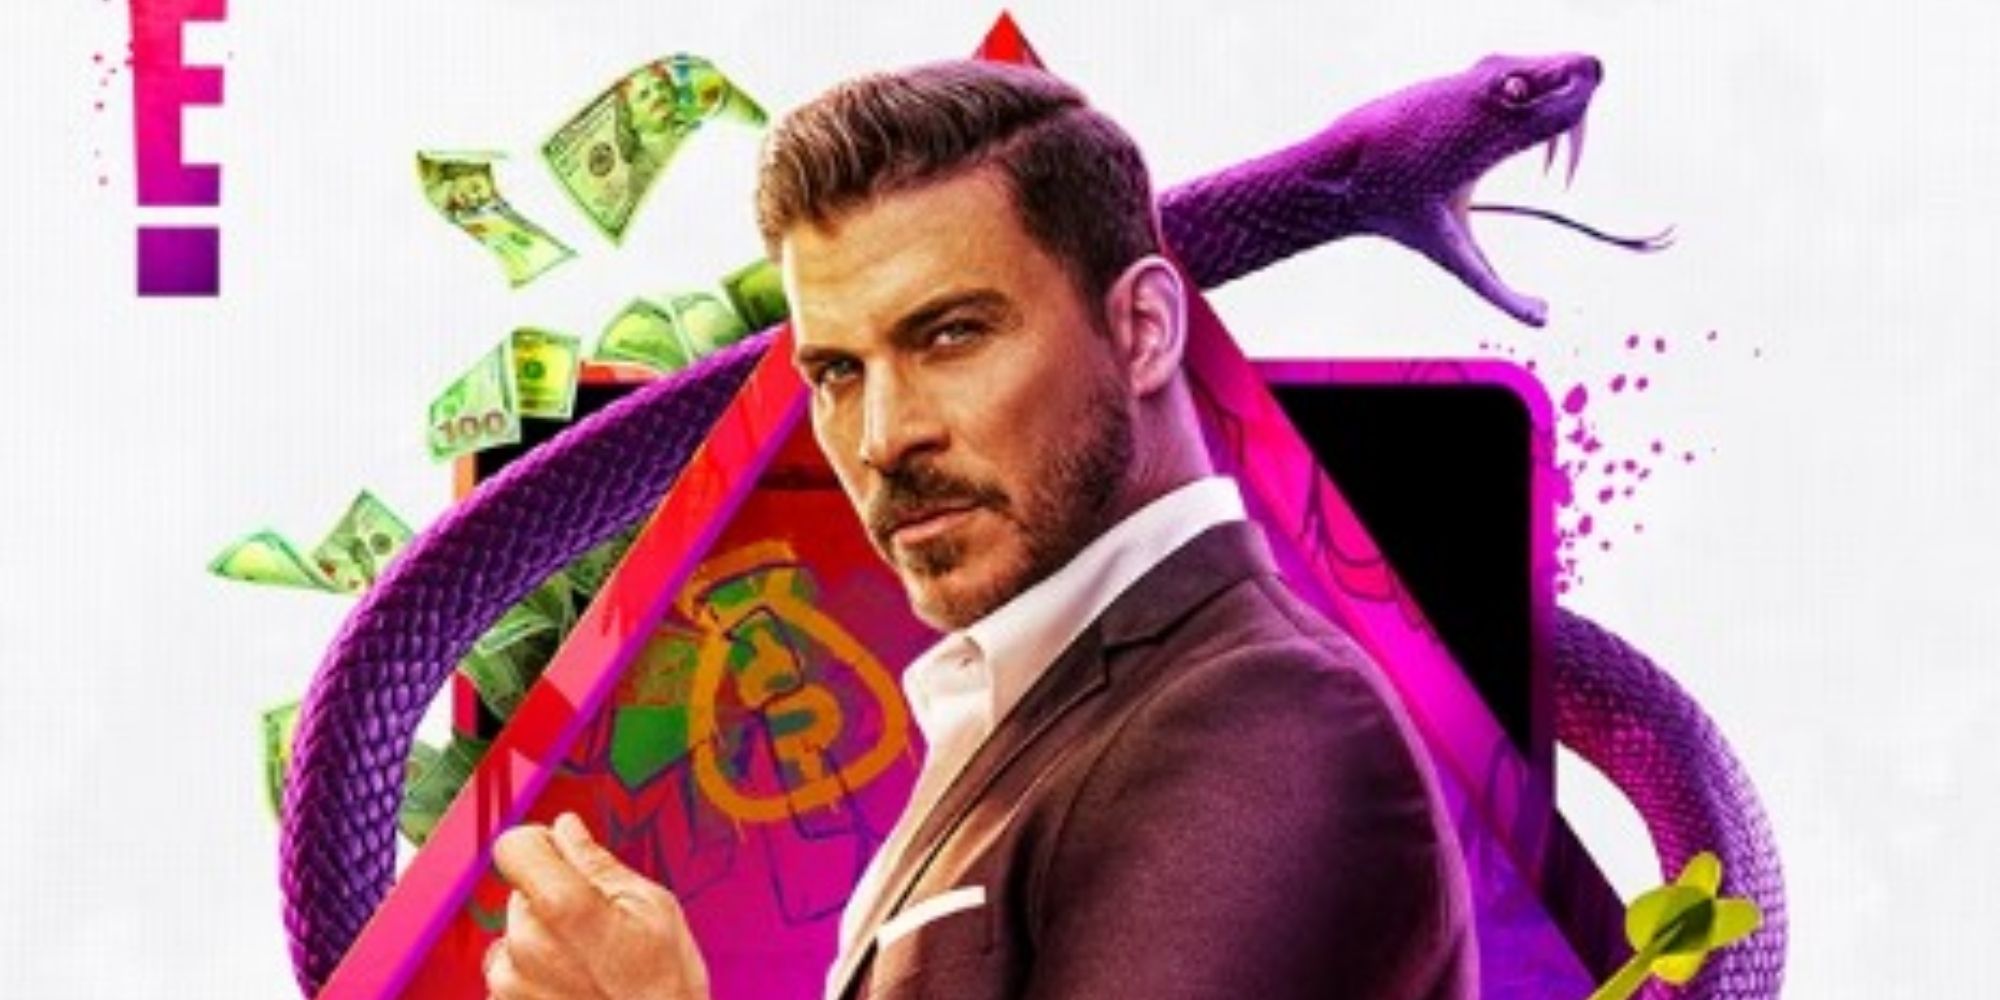 Jax Taylor wears a suit looking over his shoulder with a purple snake and money behind him in his 'House of Villains' cast photo.